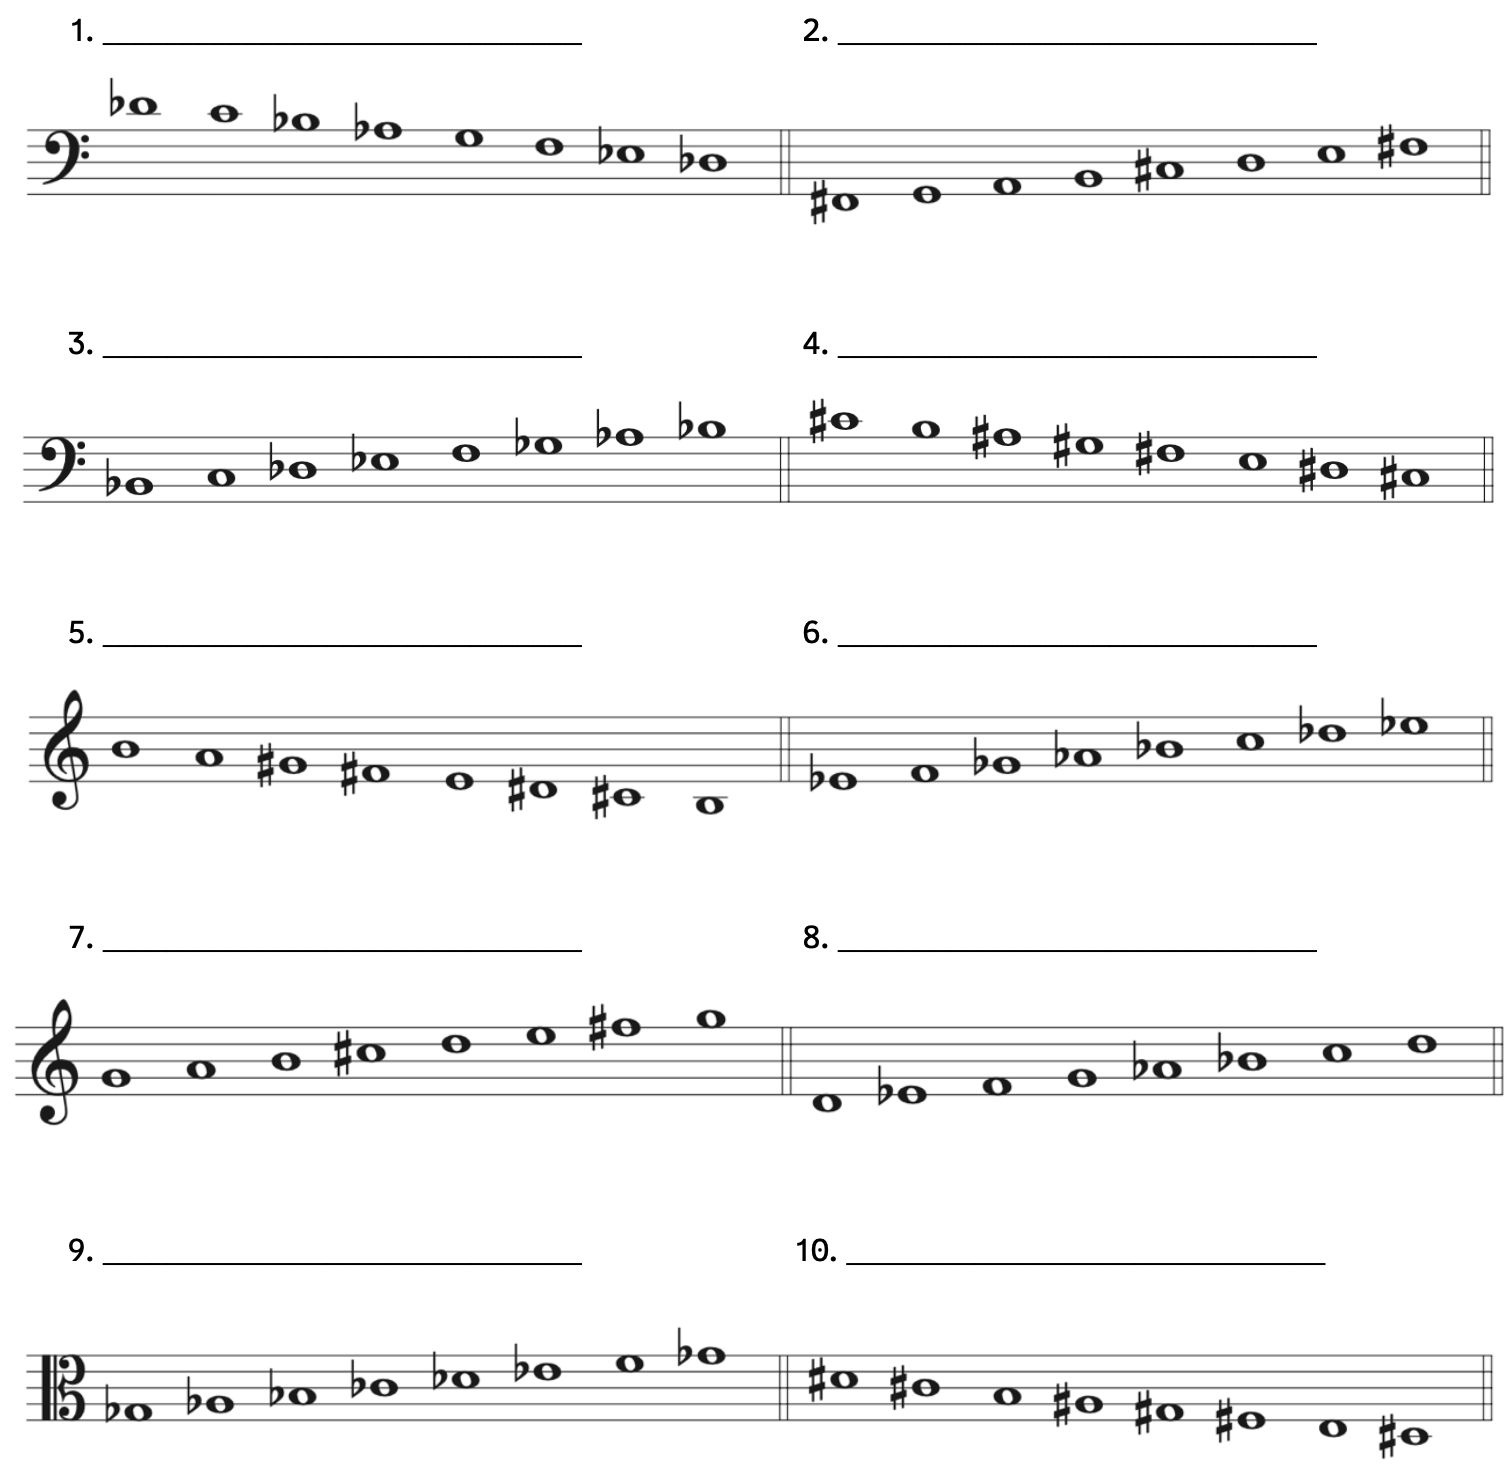 Number 1, D-flat scale with 4 flats. Number 2, F-sharp scale with 2 sharps. Number 3, B-flat scale with 5 flats. Number 4, C-sharp scale with 5 sharps. Number 5, B scale with 4 sharps. Number 6, E-flat scale with 5 flats. Number 7, G scale with 2 sharps. Number 8, D scale with 3 flats. Number 9, G-flat scale with 6 flats. Number 10, D-sharp scale with 5 sharps.